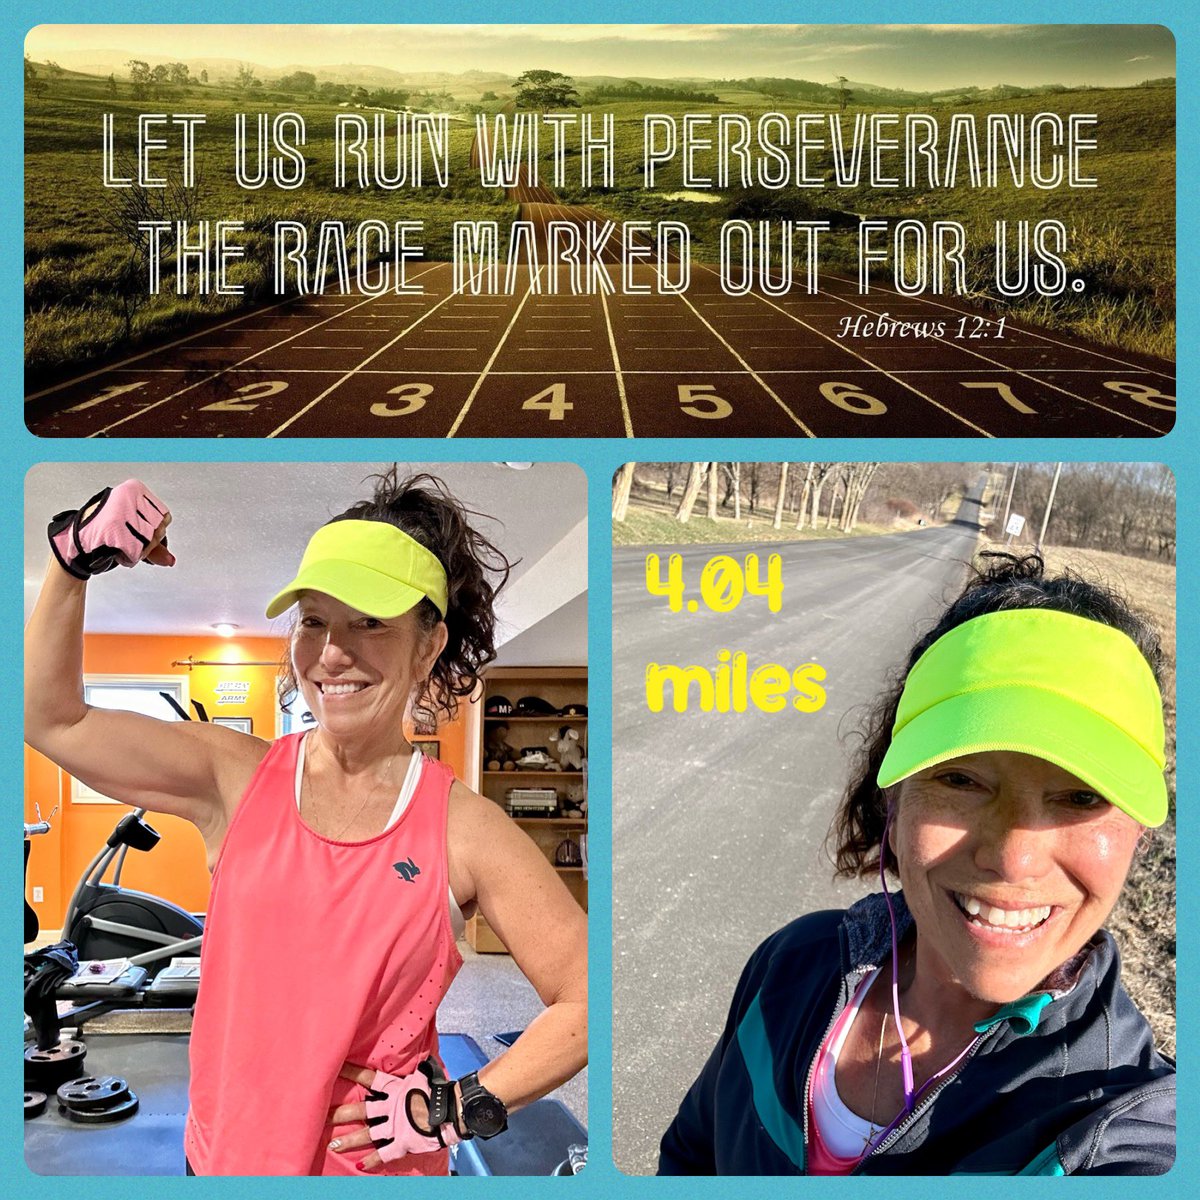 💦🏋️‍♂️🏃‍♀️☀️ #SaturdayVibe

✔️ Closing in on finishing Collection 2 (wk8) of the #DigDeeper program! Love, love, love it! Looking forward to starting Collection 3 on Monday! 

✔️ Beautiful morning for a rural run. Felt really strong today. Just in time for HM training, starting on